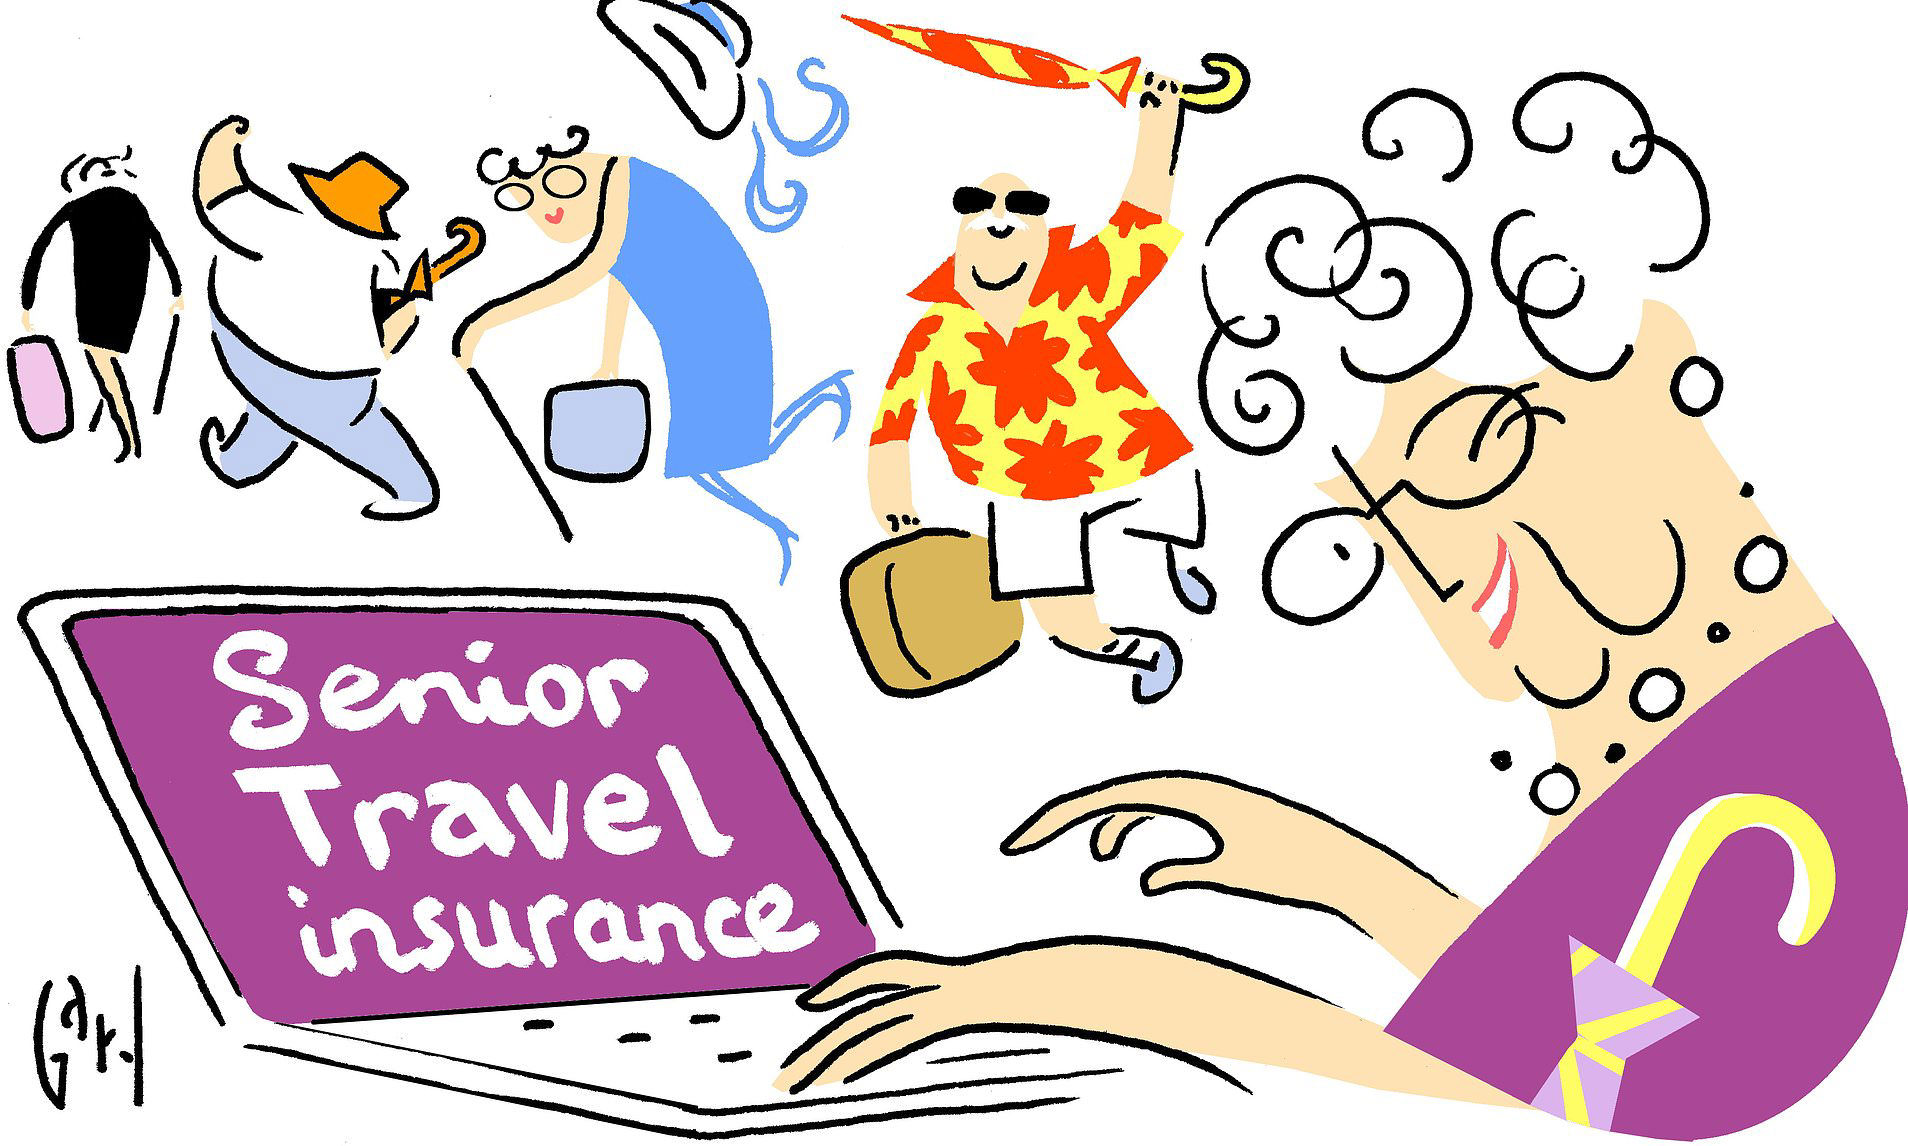 for travel insurance the permissible age limit is